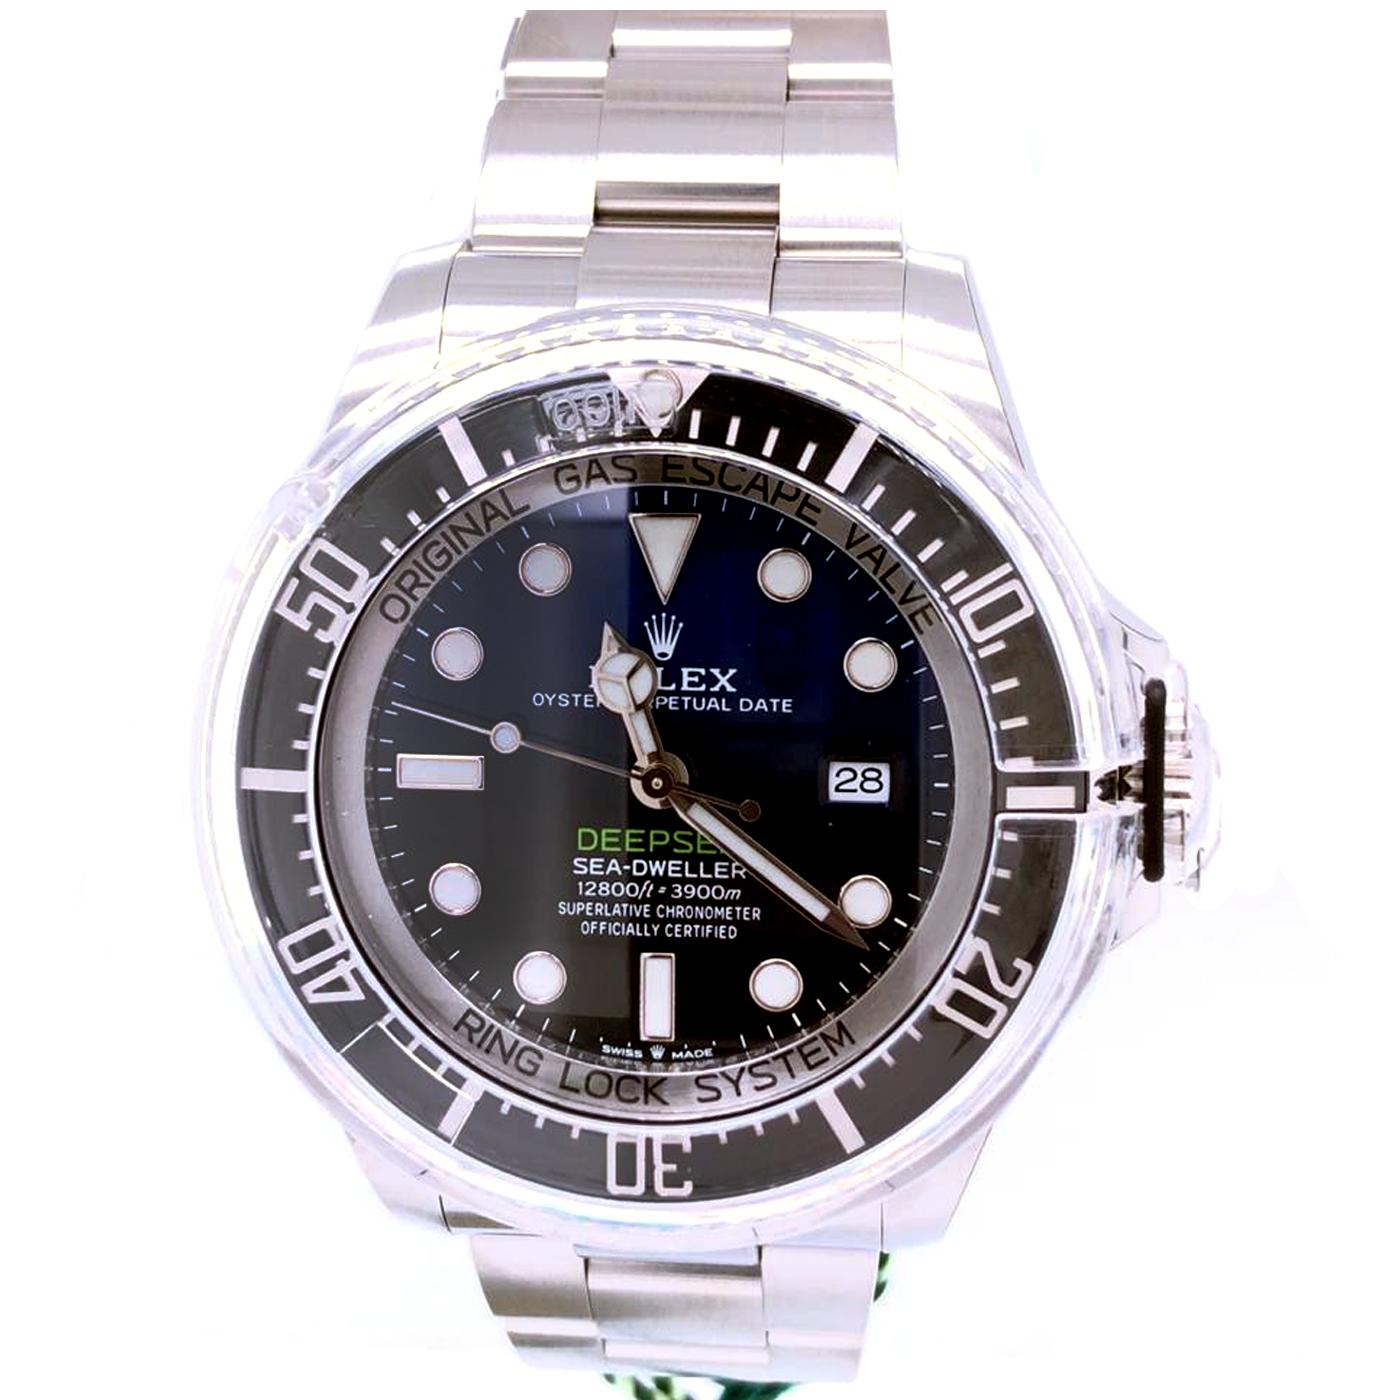 The Oyster Perpetual Rolex Deepsea in Oystersteel with a Cerachrom bezel insert in black ceramic and an Oyster bracelet. It features a D-blue dial and large luminescent hour markers. Waterproof to a depth of 3,900 meters (12,800 feet) with a